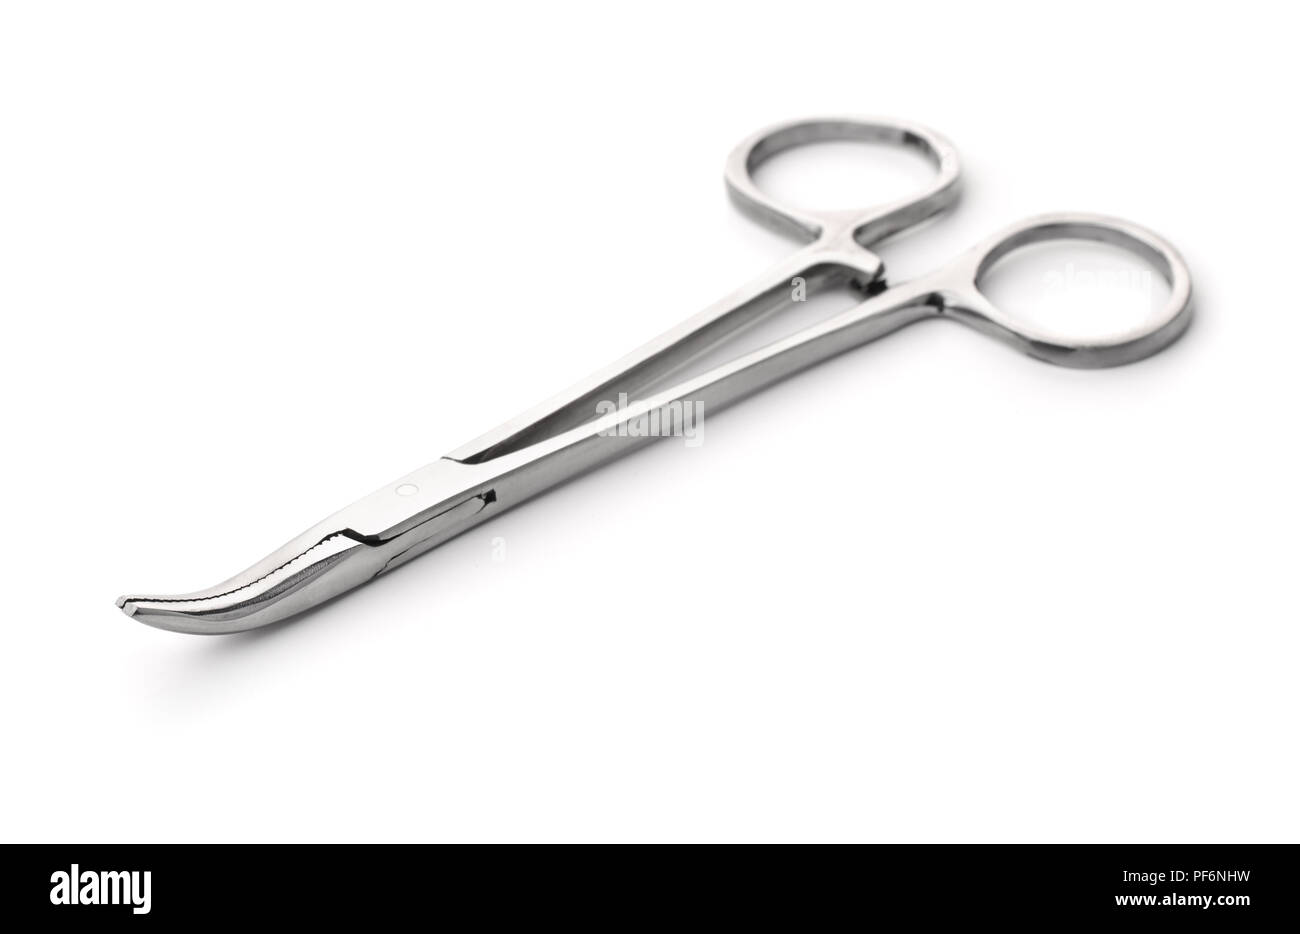 Pair of steel surgical forceps isolated on white Stock Photo - Alamy